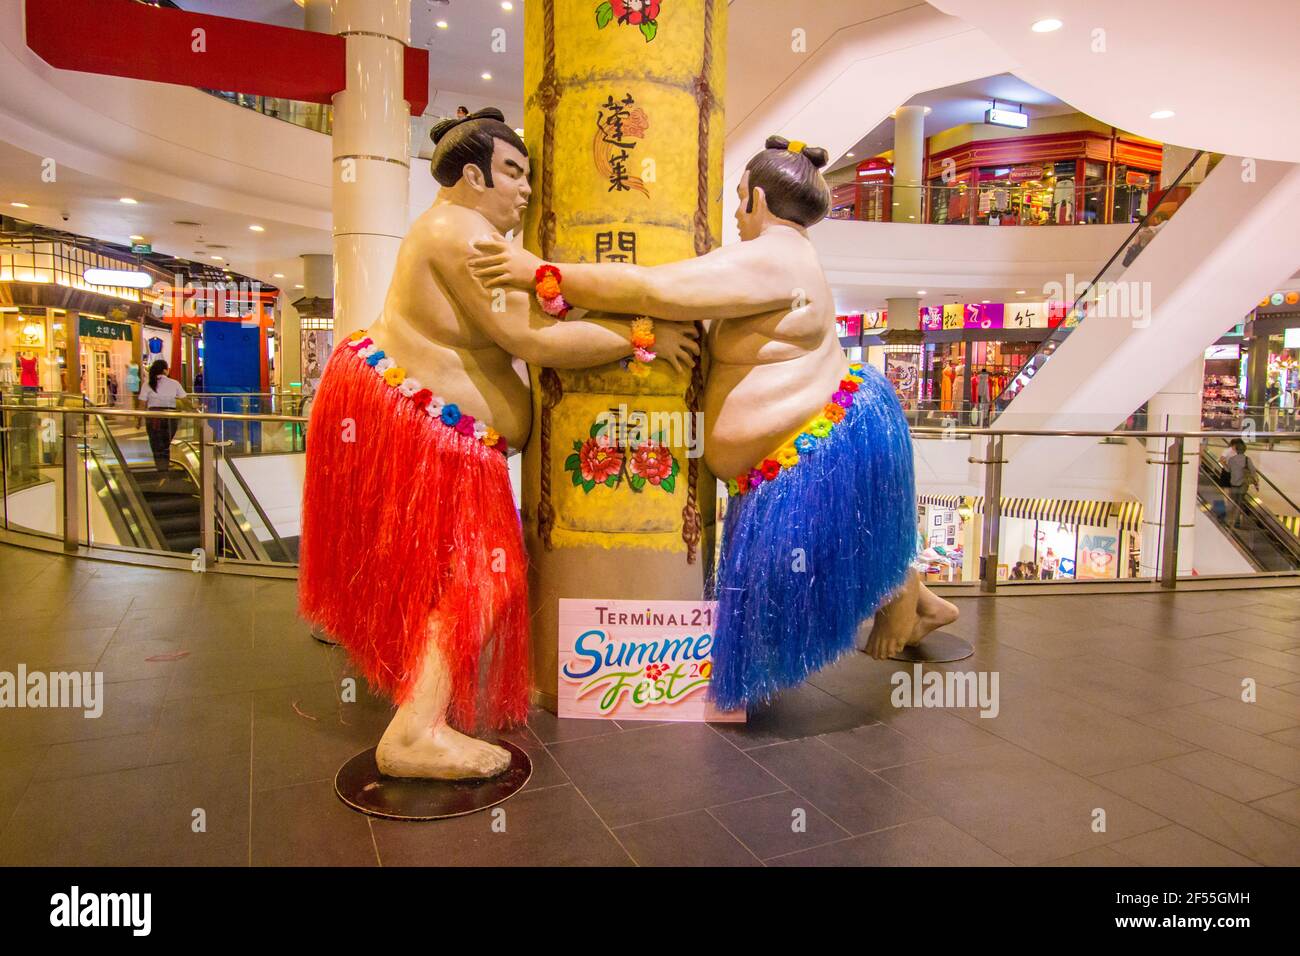 Fun, silly interior of Terminal 21 shopping mall with unique models. Here, two Japanese sumo wrestlers with Hawaiian grass skirts. In Bangkok, Thailan Stock Photo